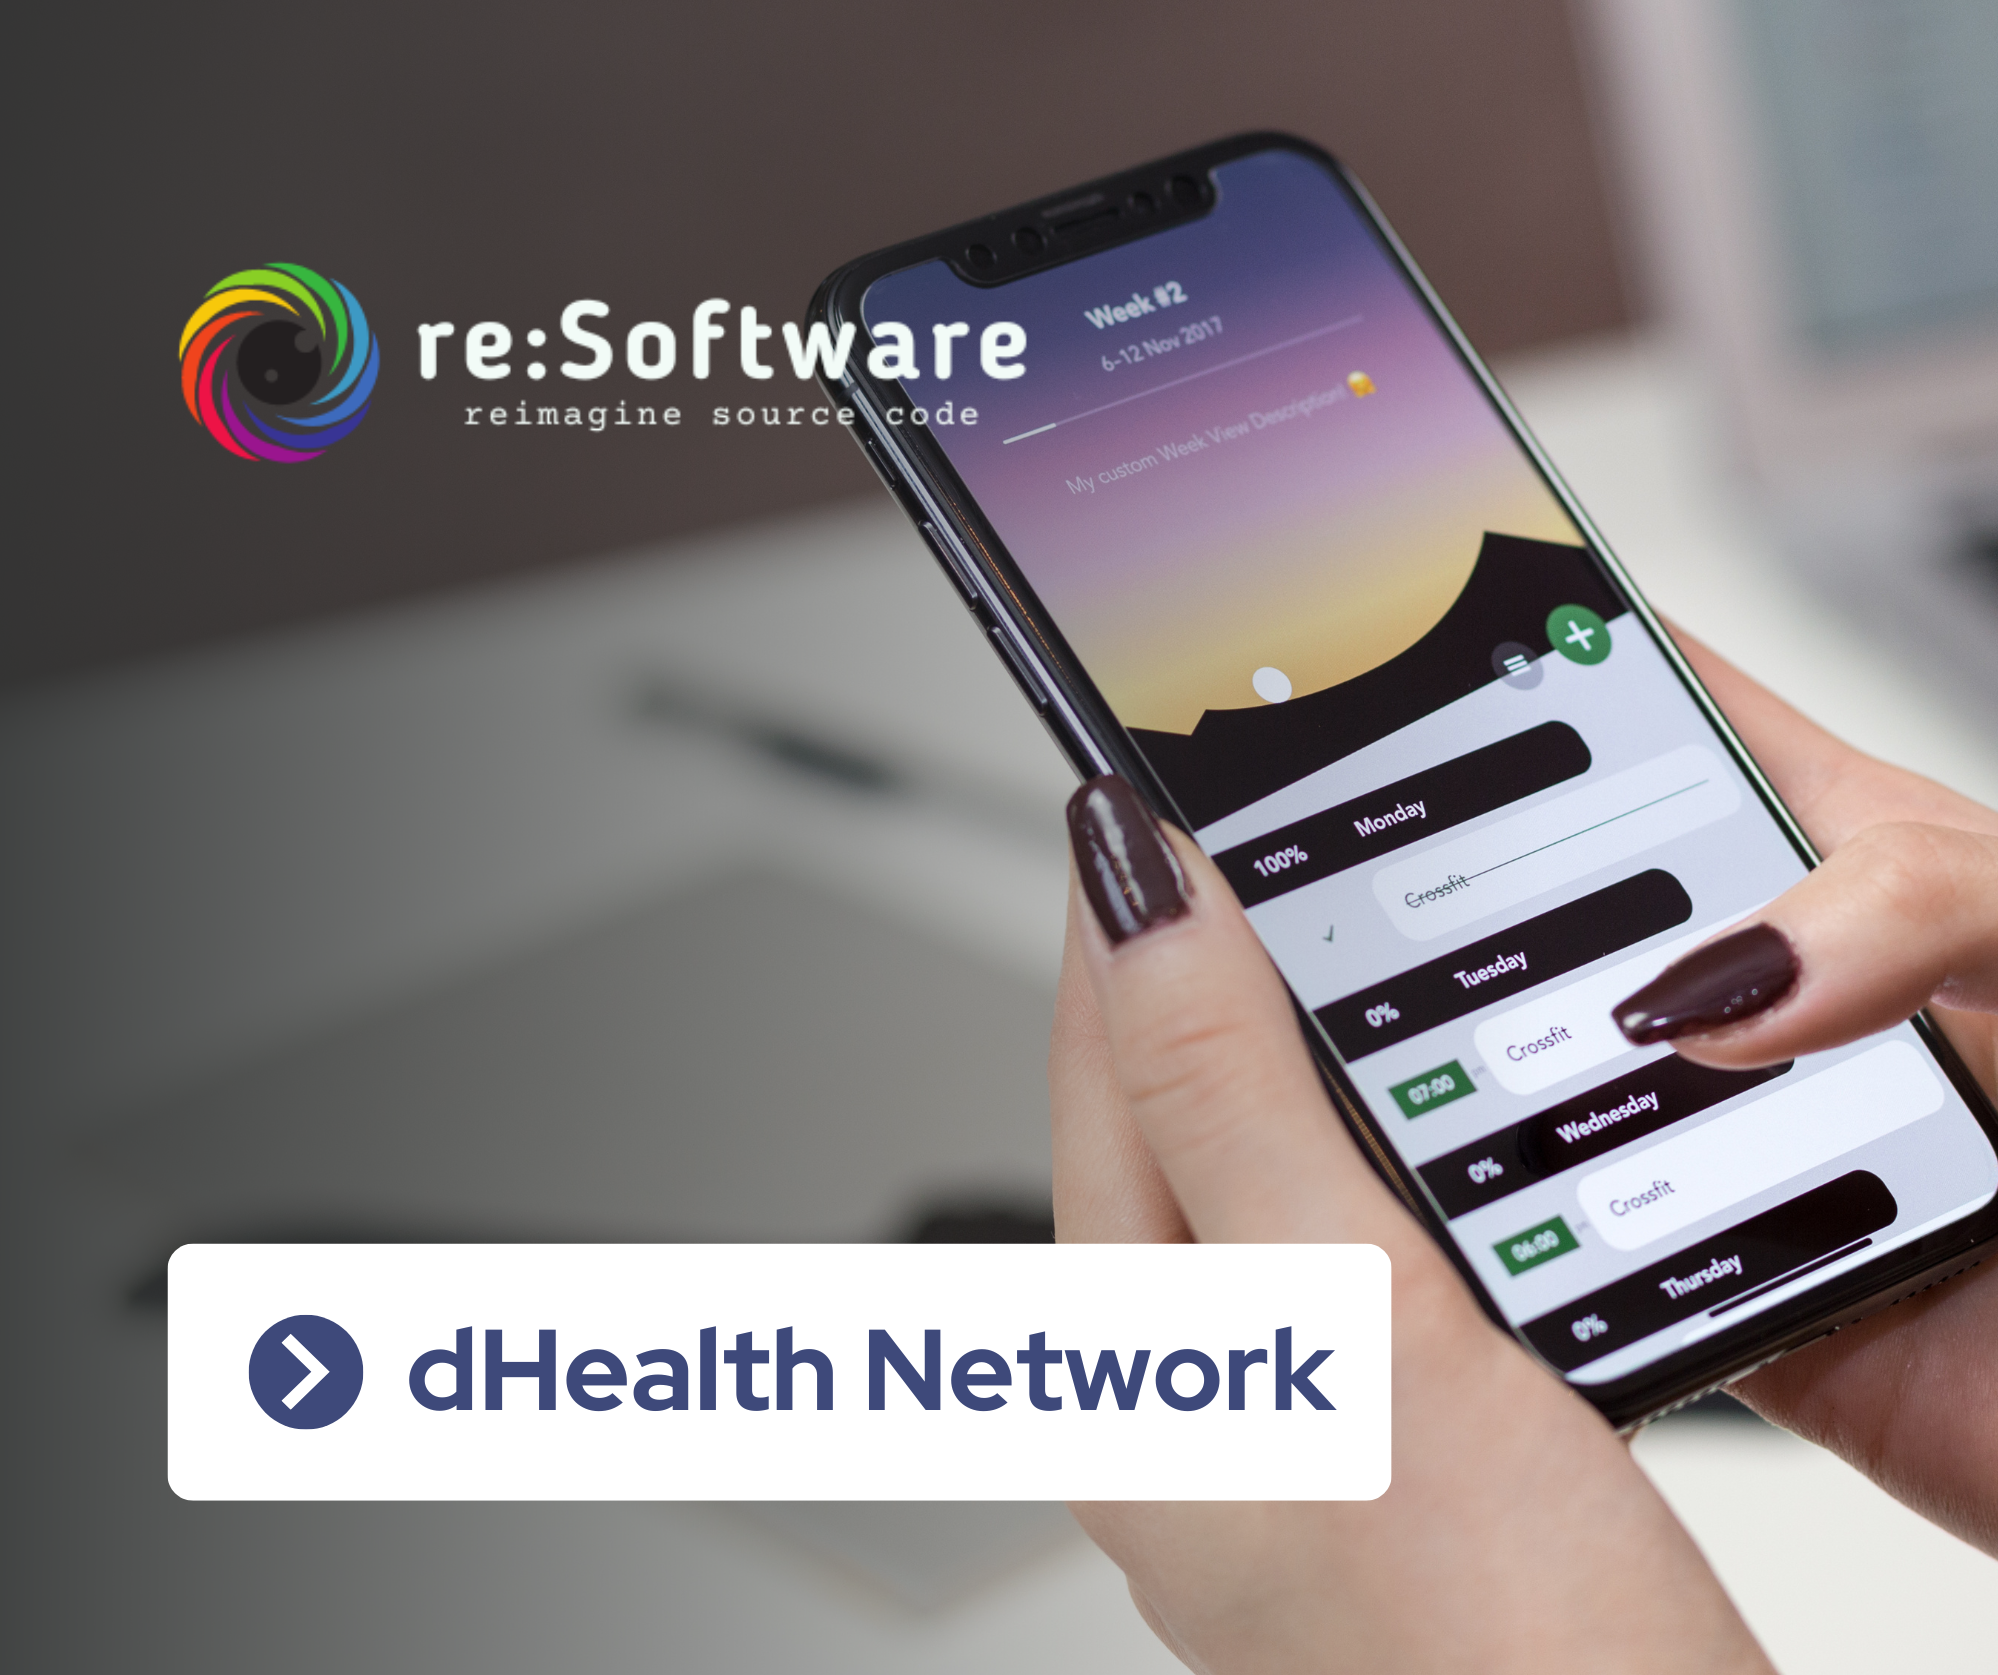 dHealth Network by re:Software S.L.